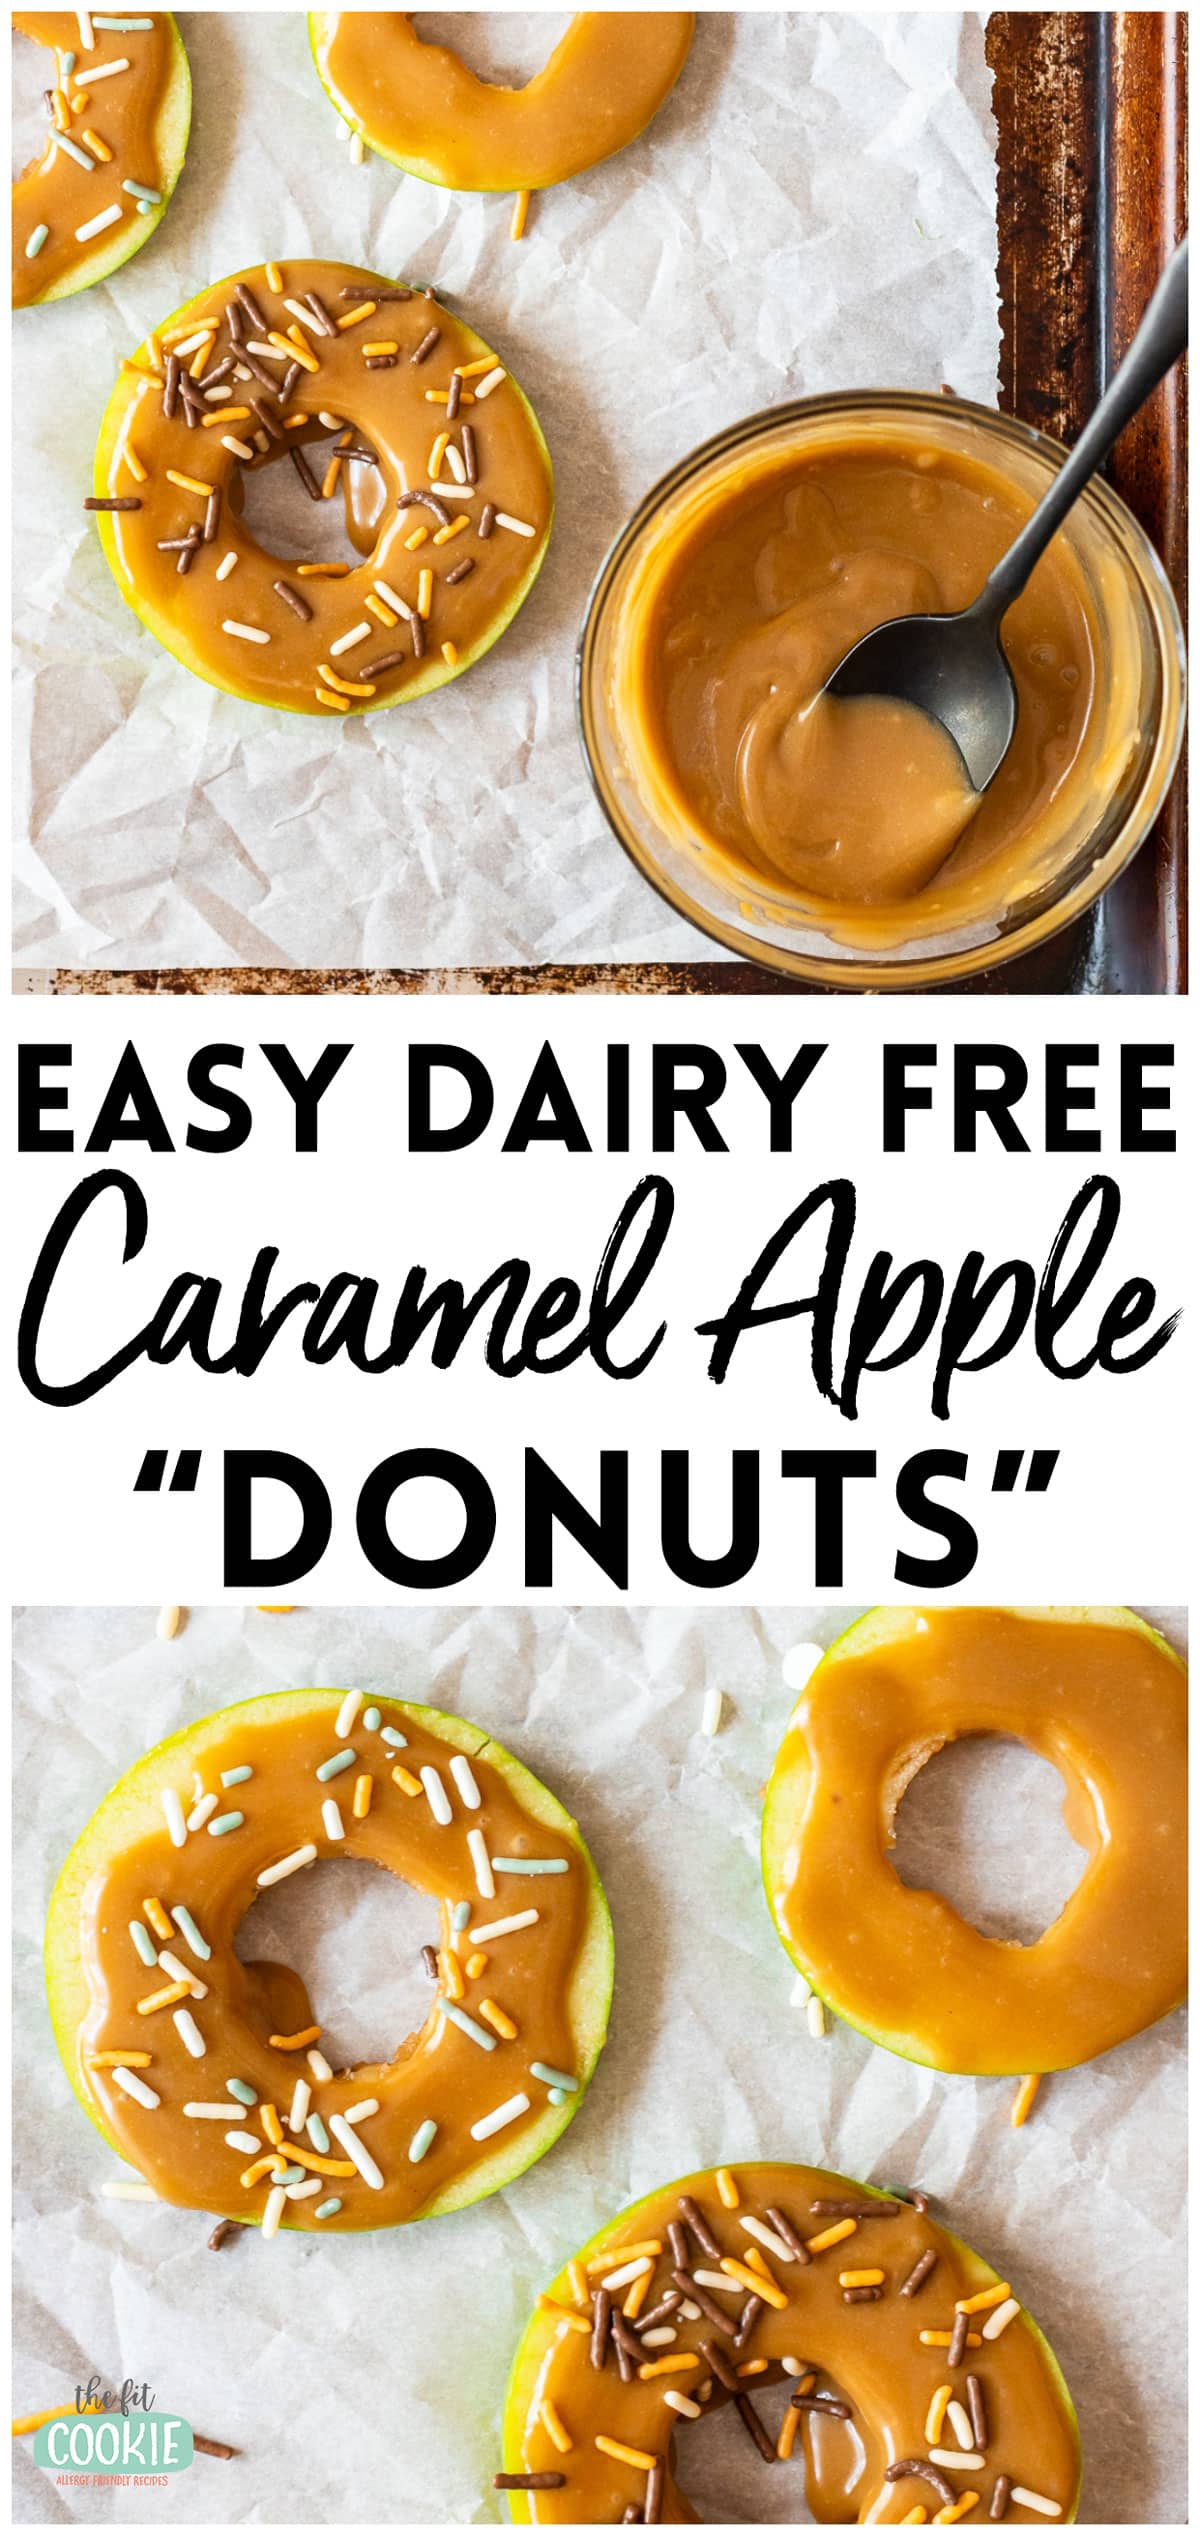 photo collage showing easy dairy free caramel apple donuts with sprinkles.